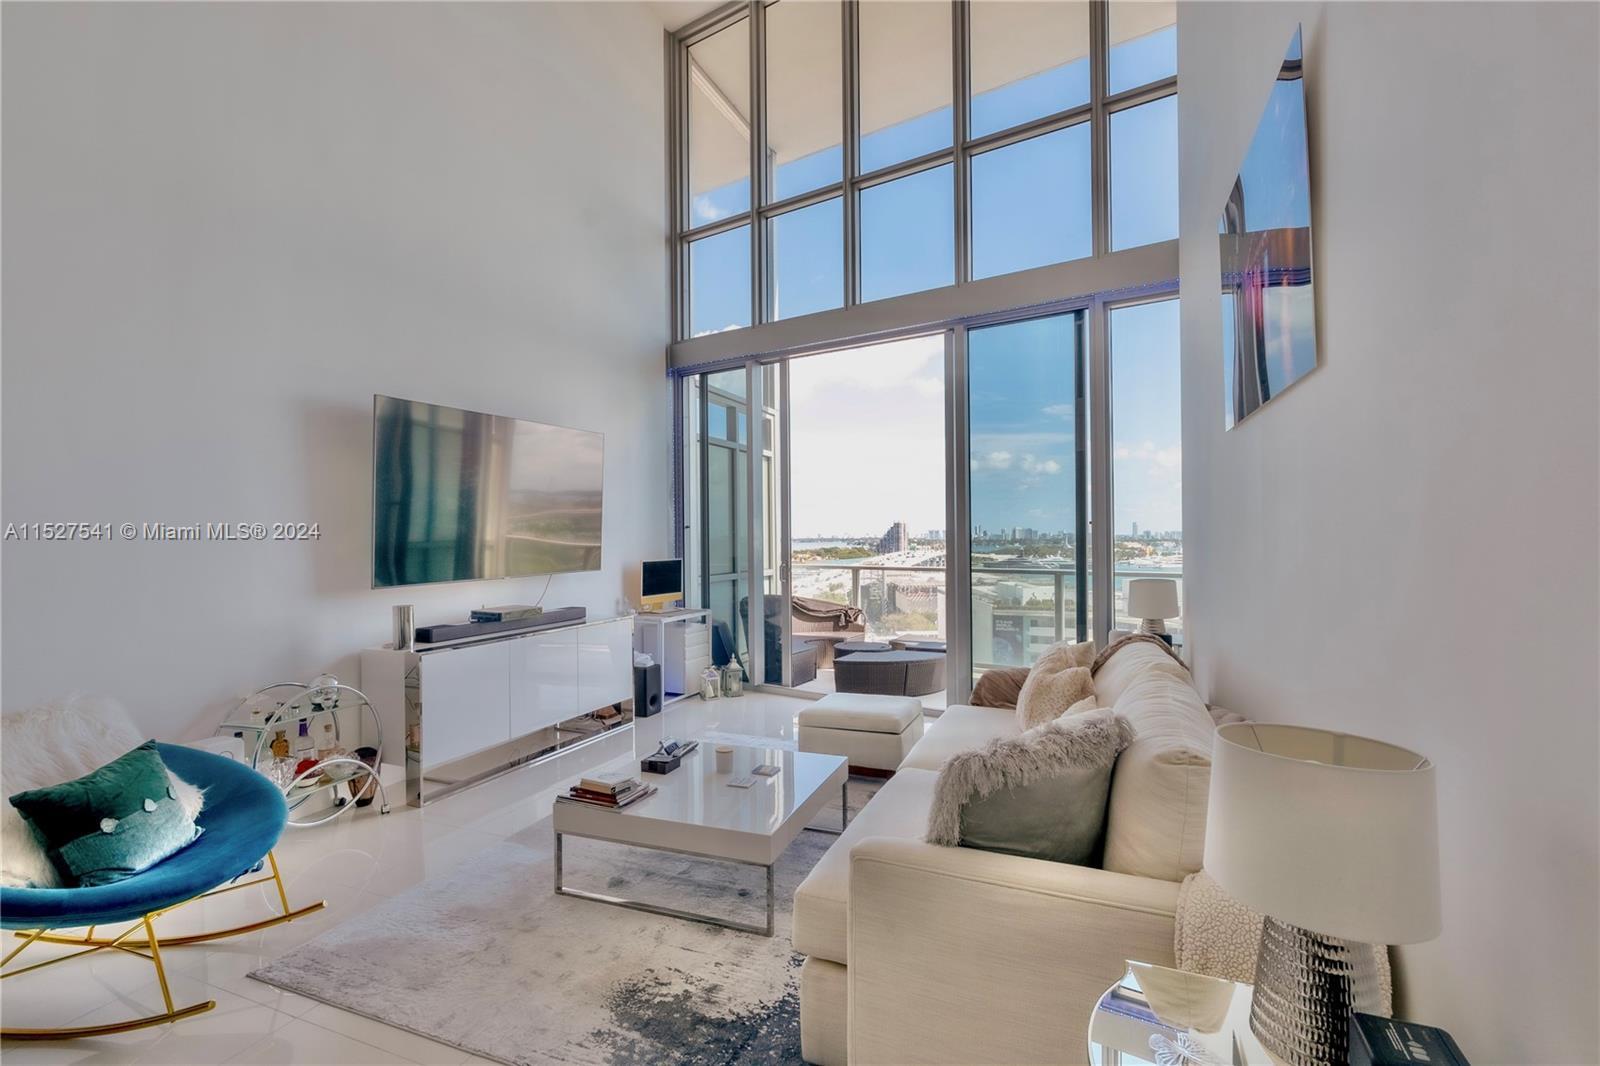 Best priced direct east unit per square foot at Marquis Residences. Lower floor direct bay view with